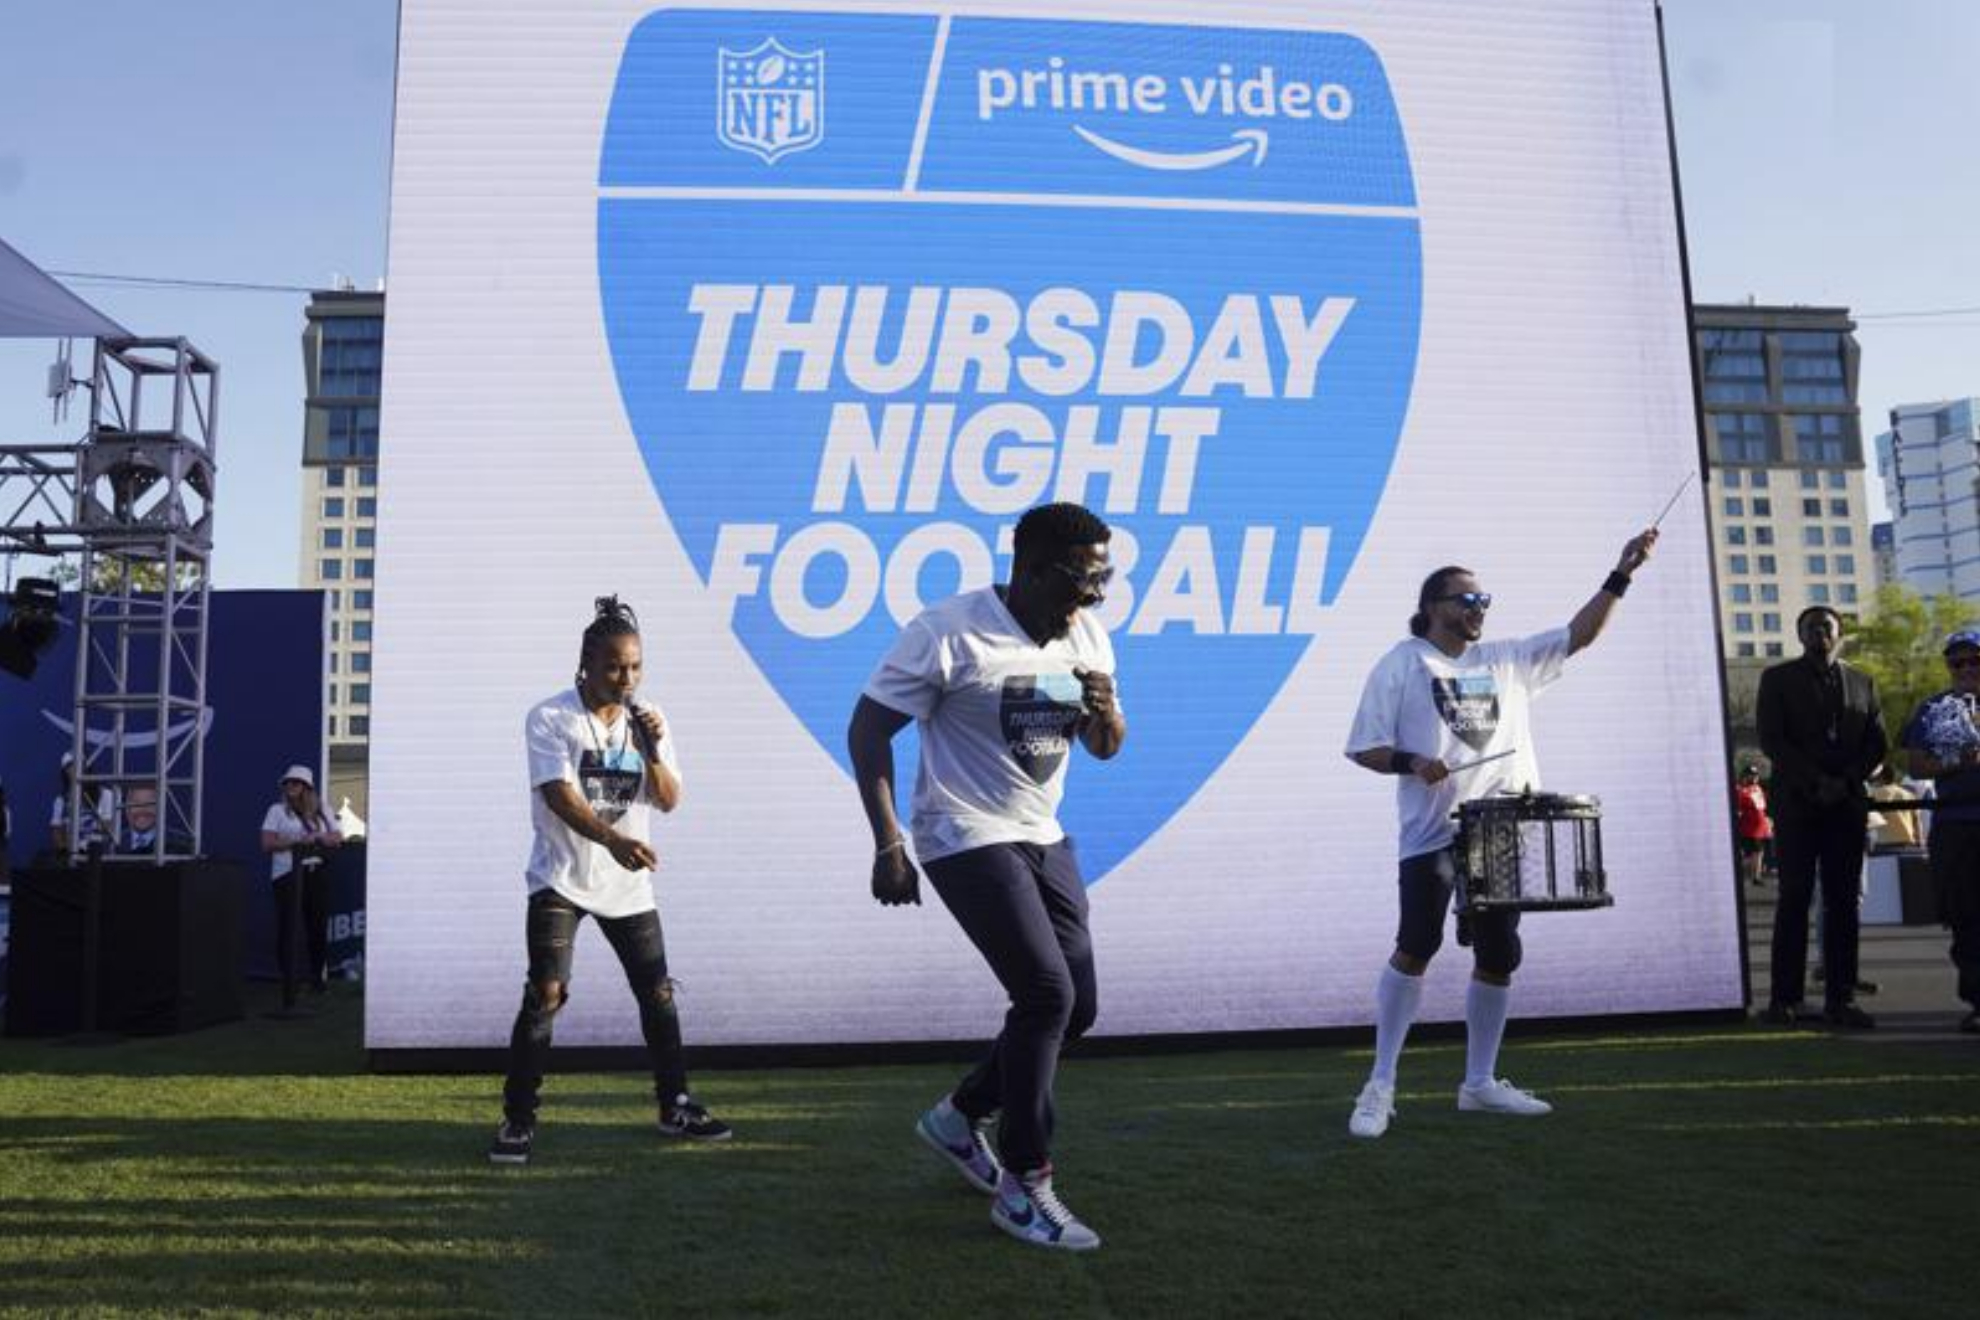 The NFL will play a game on 'Black Friday' starting next season